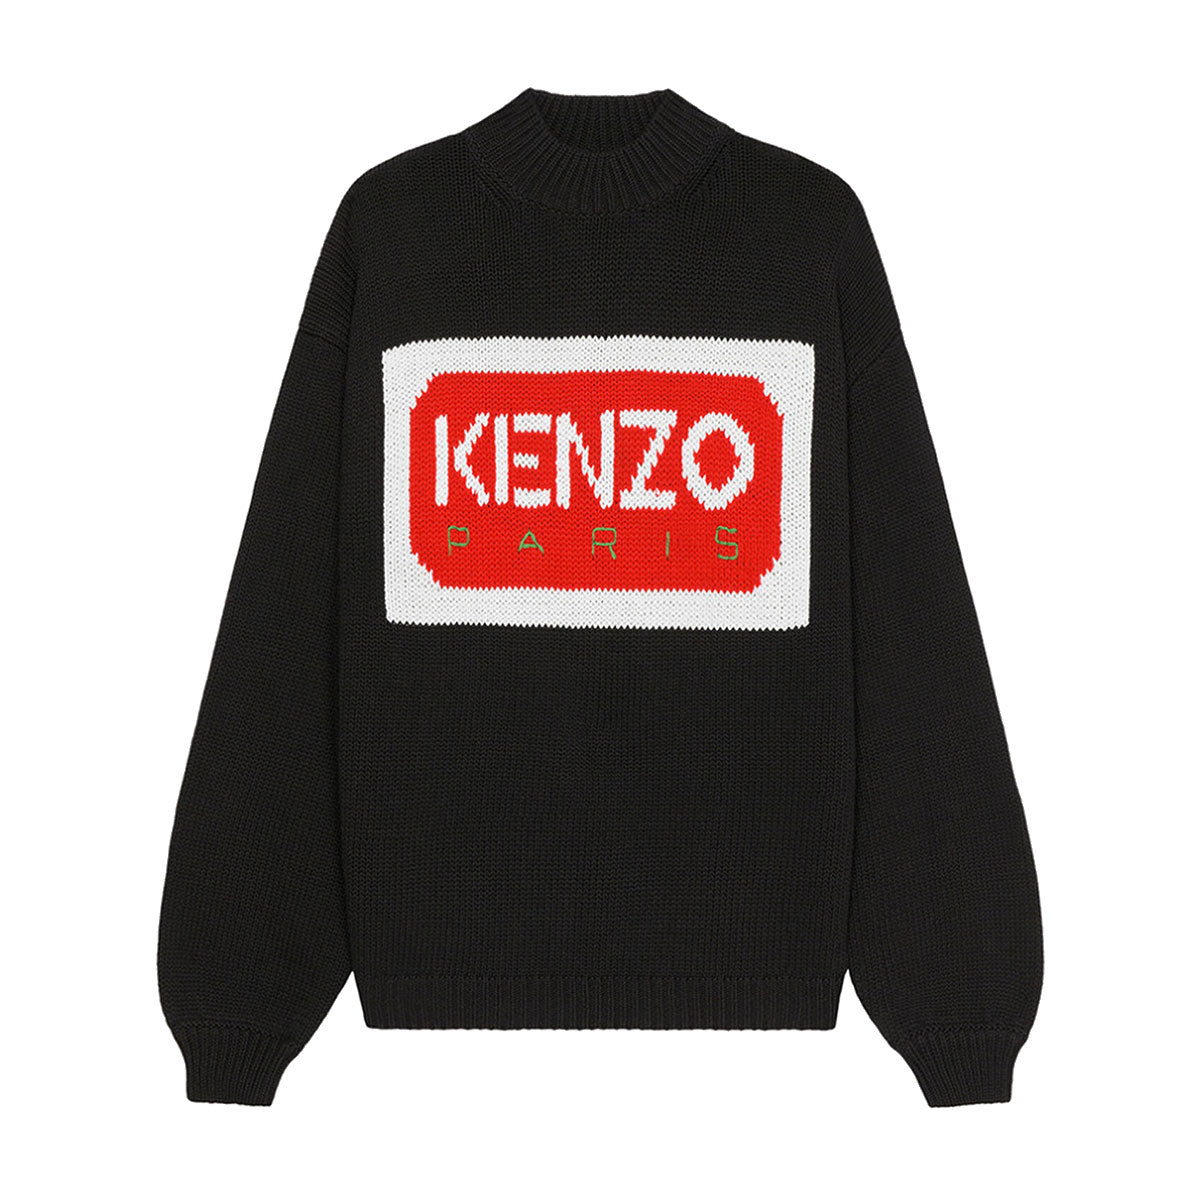 KENZO PARIS ジャンパー | Why are you here?